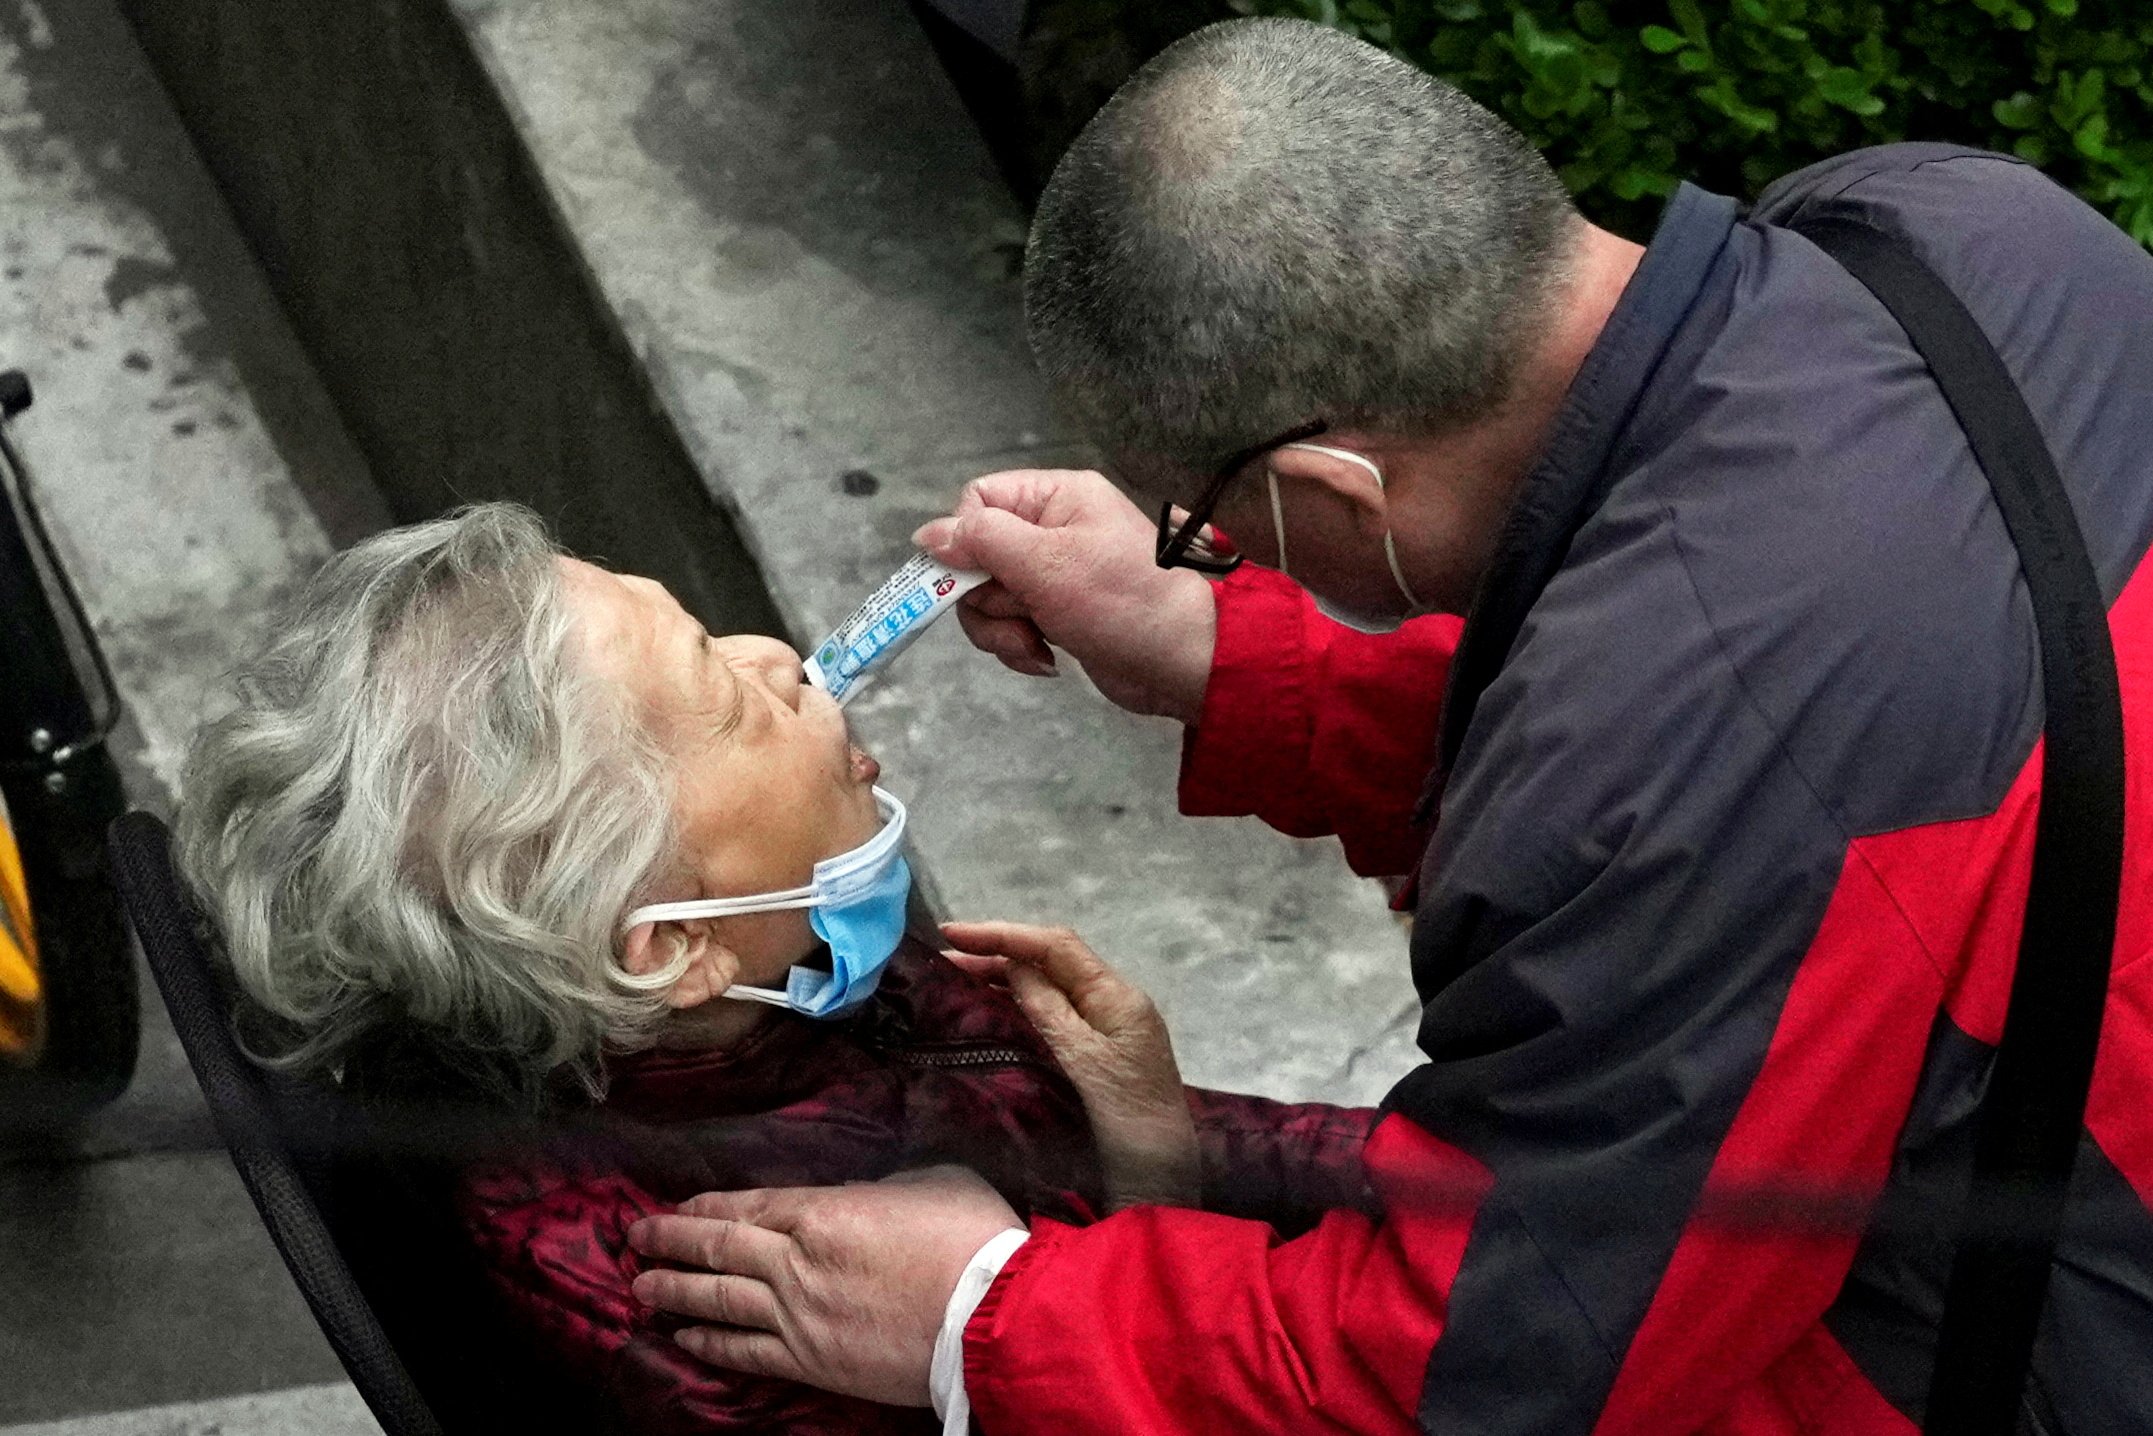 A man helps a woman consume a packet of Lianhua Qingwen as she sits by the side of a road outside a residential compound during a lockdown in Shanghai on April 5. Photo: Reuters